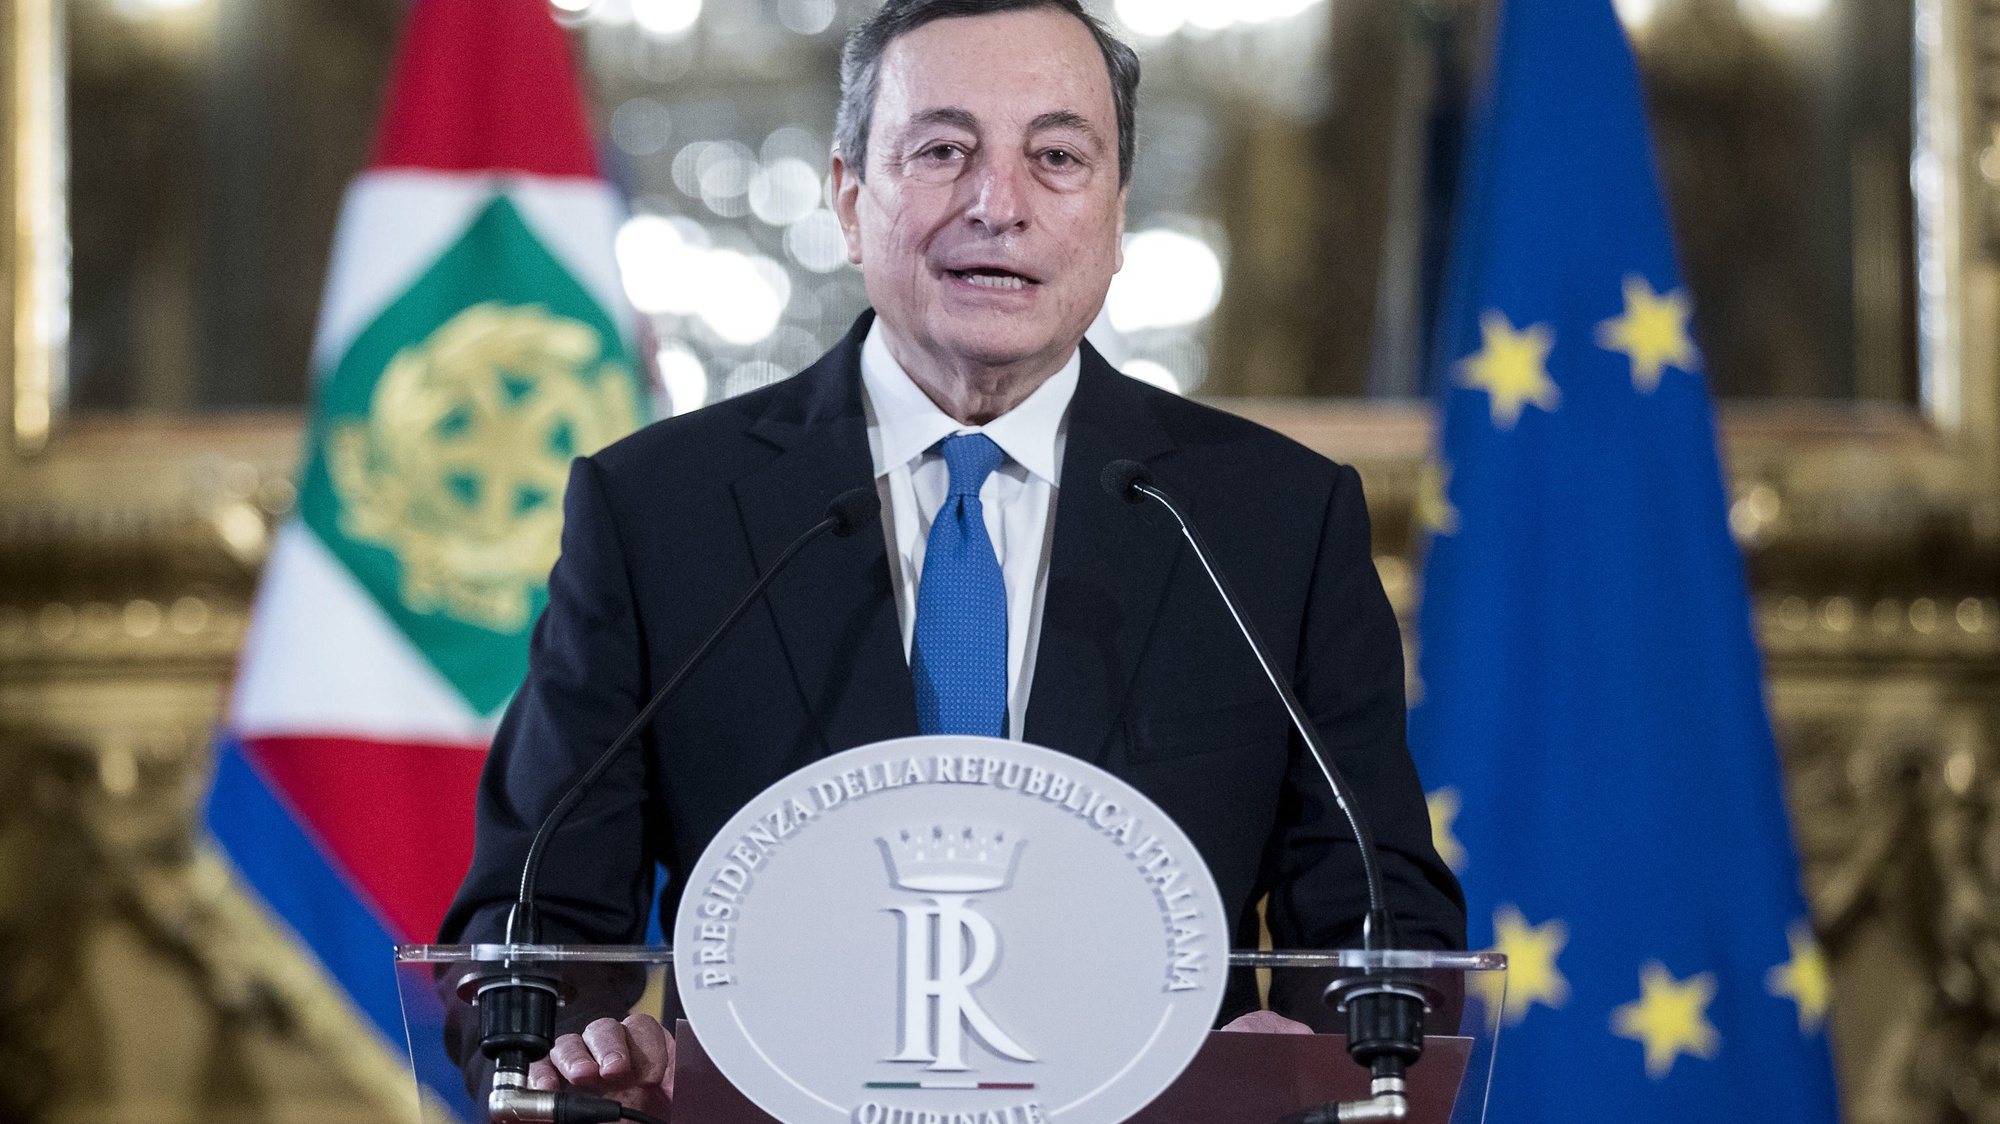 epa08984111 Former president of the European Central Bank (ECB) Mario Draghi delivers a speech after a meeting with the Italian President Sergio Mattarella at the Quirinal Palace in Rome, Italy, 03 February 2021. 2021. President Mattarella has summoned Draghi for a meeting seeking for a &#039;high-profile&#039; government. Mattarella, who said he was left with two choices, either calling snap elections or nominating a technical government, made the announcement after the ruling coalition failed to form a majority following Giuseppe Conte&#039;s resignation as prime minister.  EPA/ROBERTO MONALDO / POOL